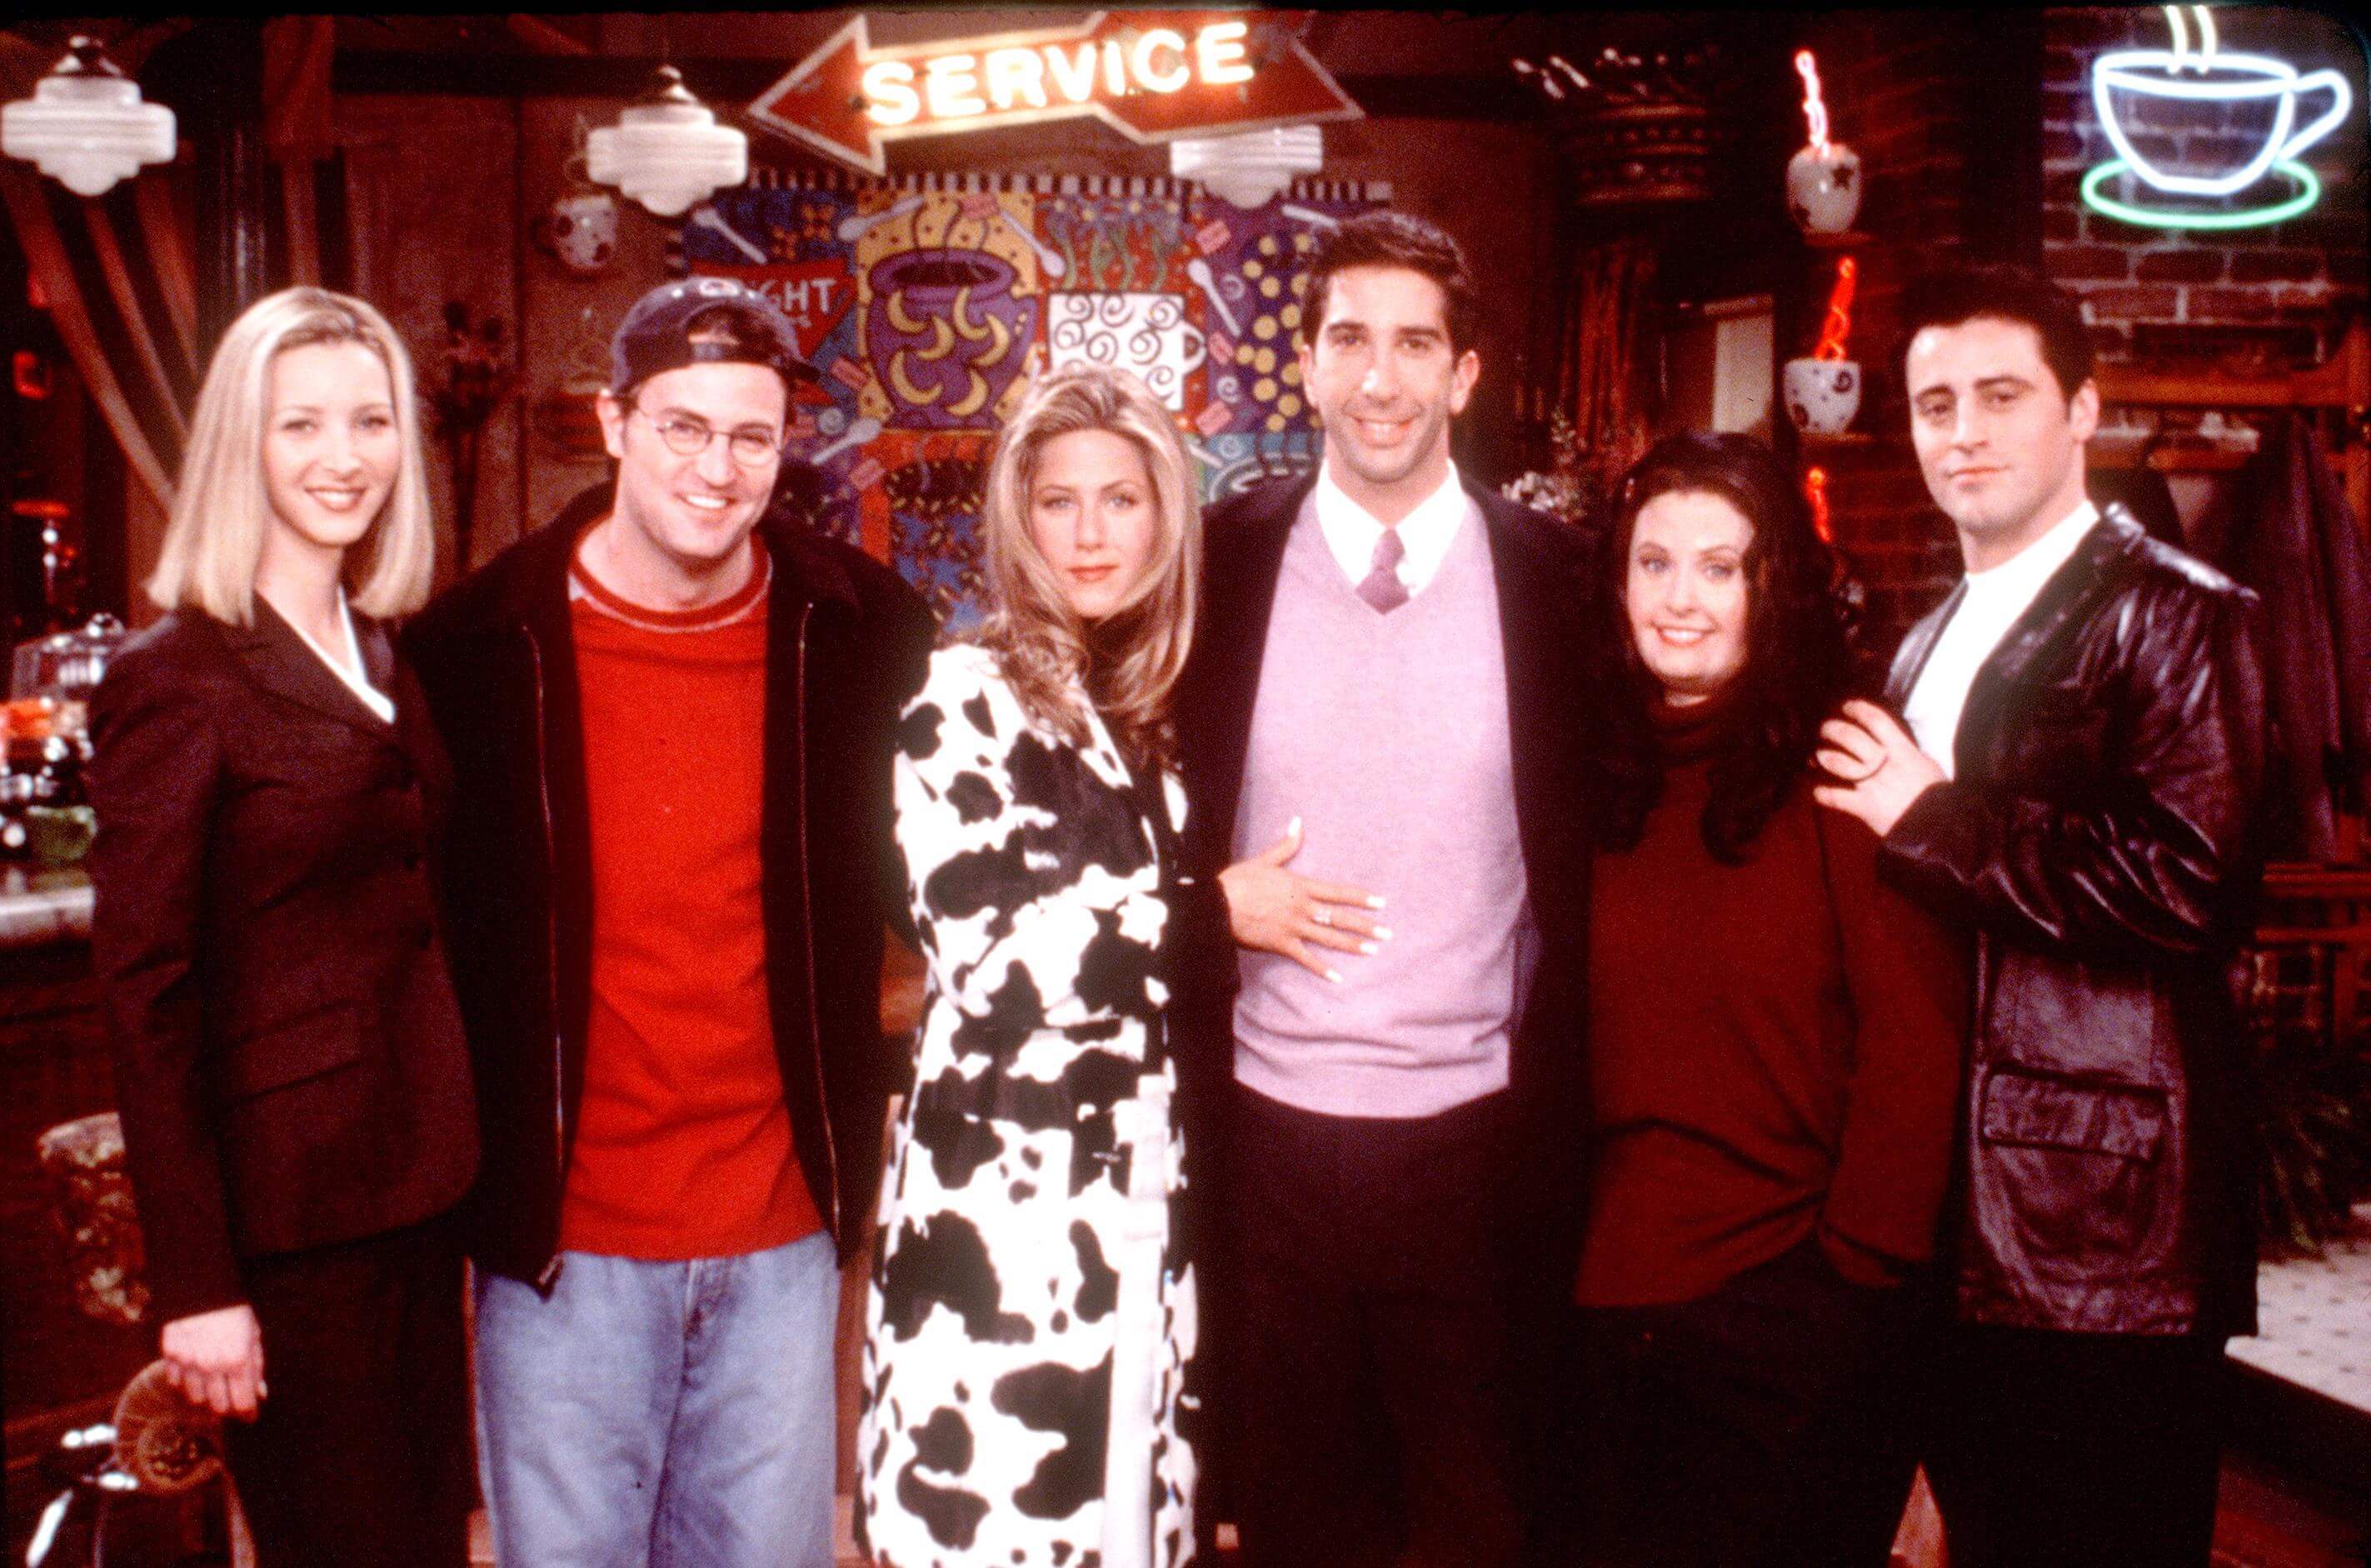 Matthew Perry with the rest of the 'Friends' cast standing side by side